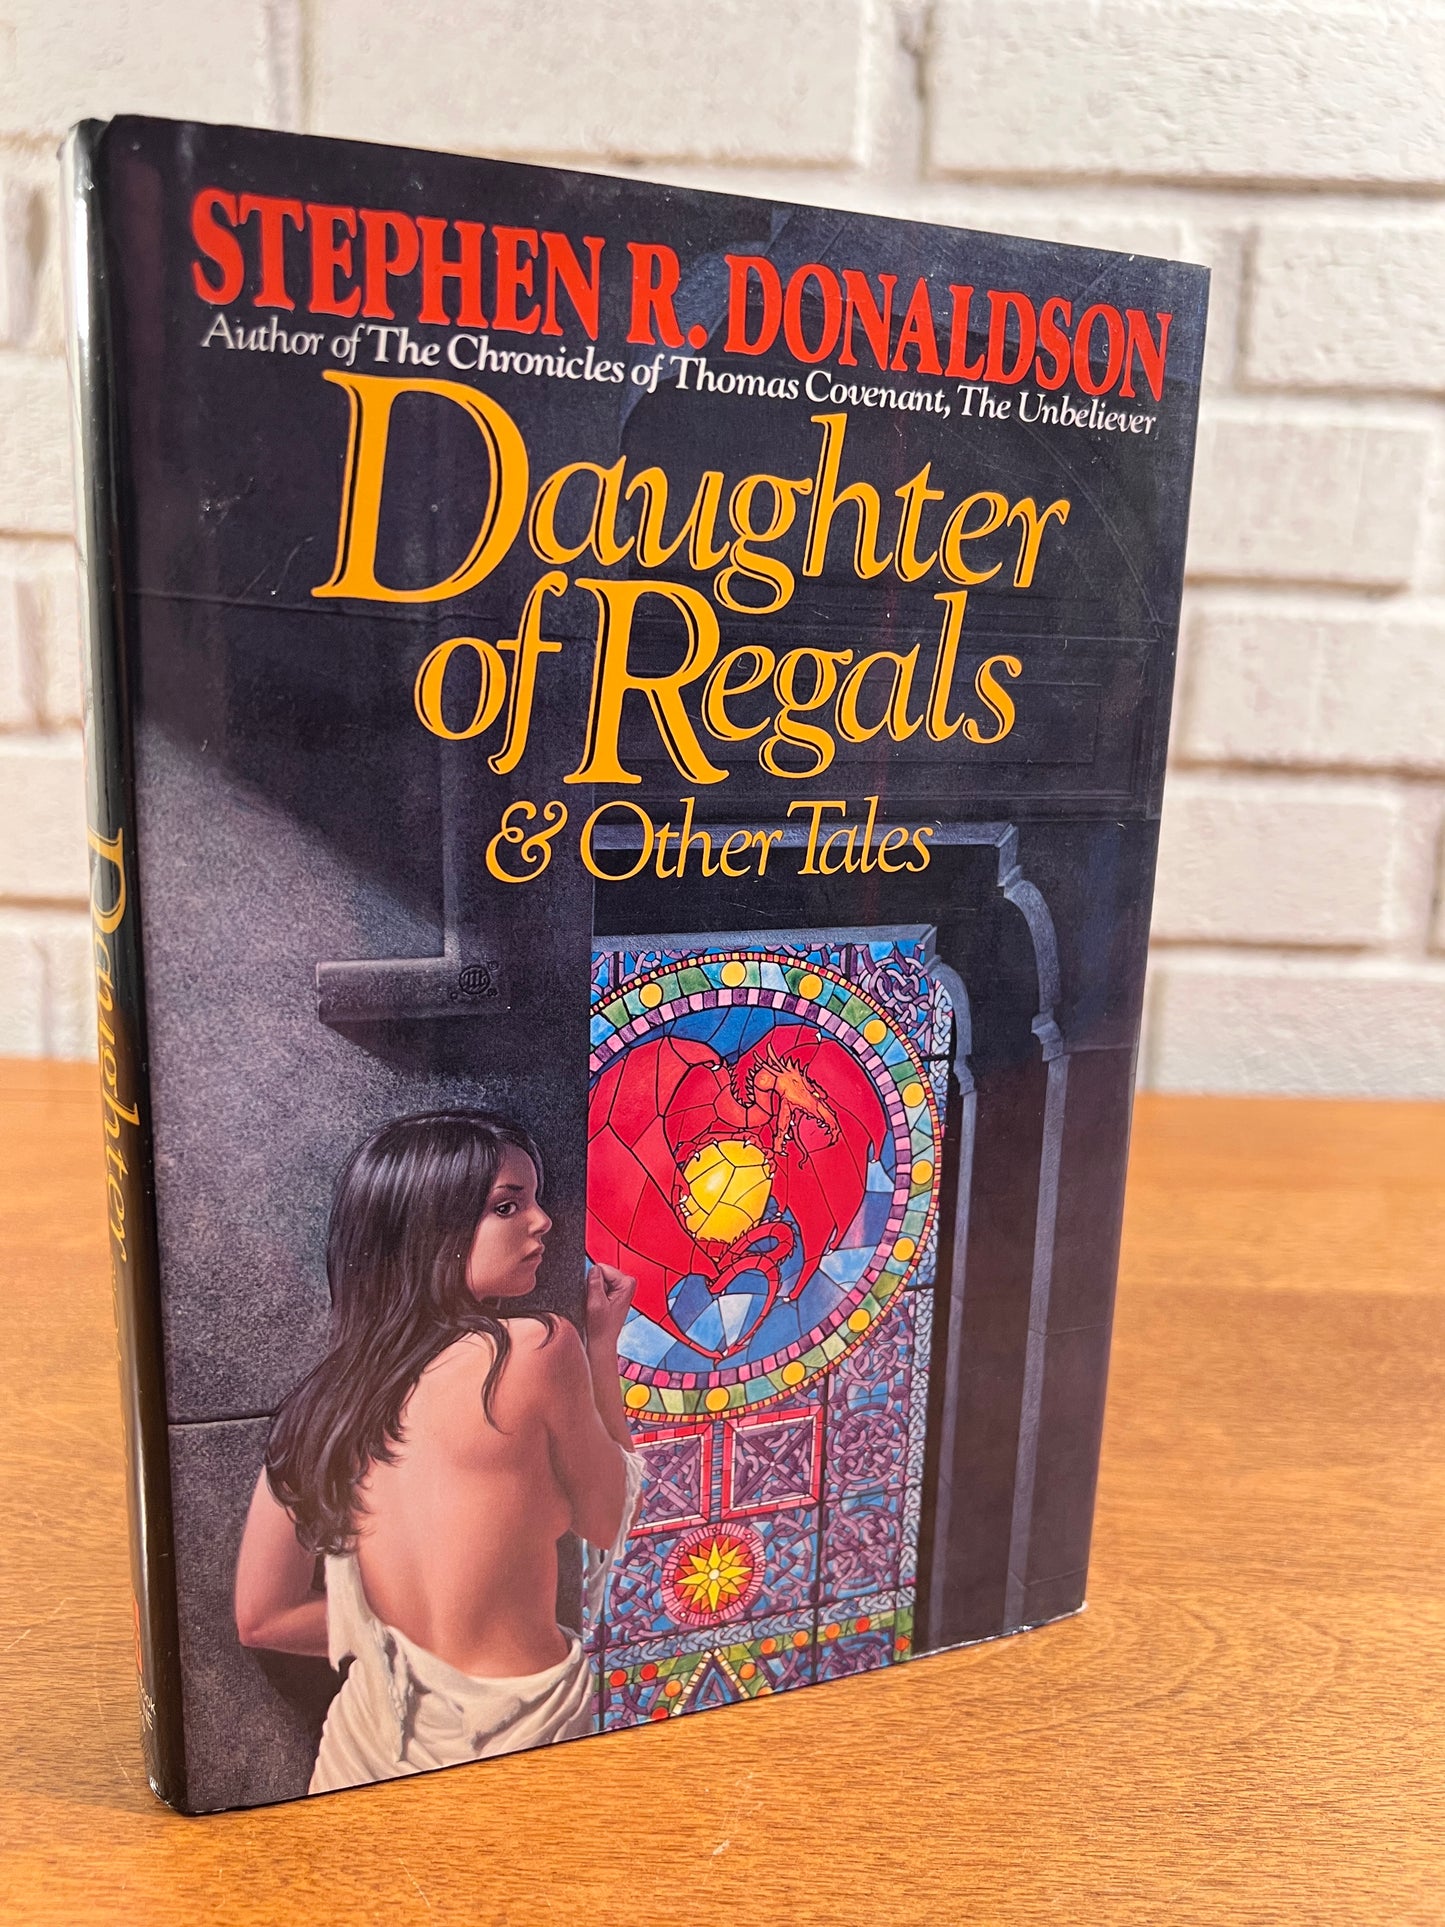 Daughters of Regals & Other Stories by Stephen R. Donaldson